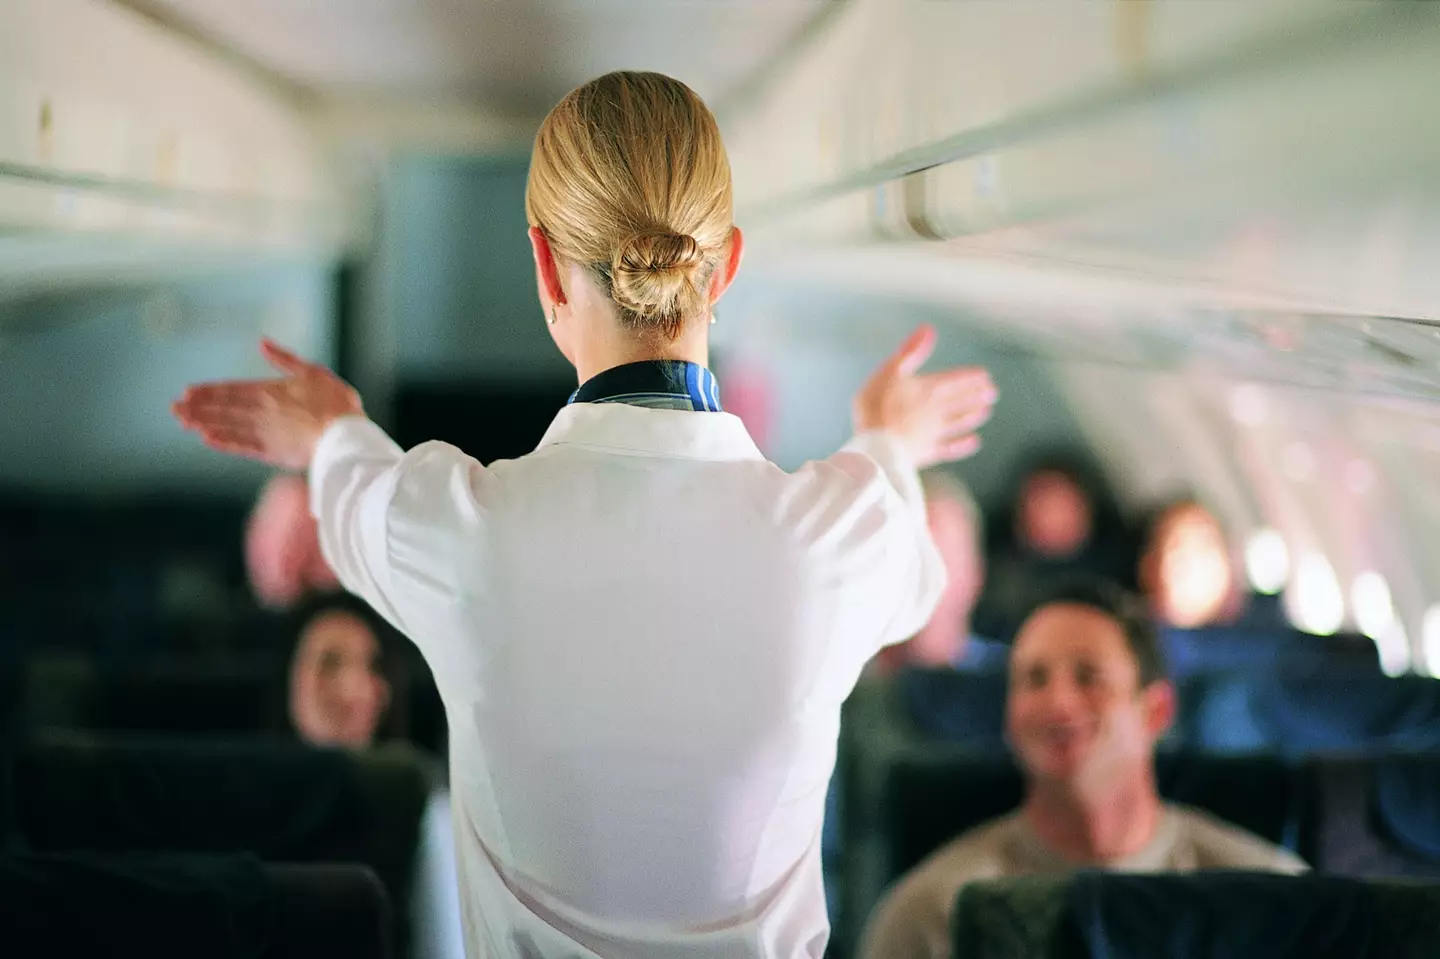 Ever wondered how to 'shoot your shot' with a flight attendant? (James Lauritz / Getty Images)